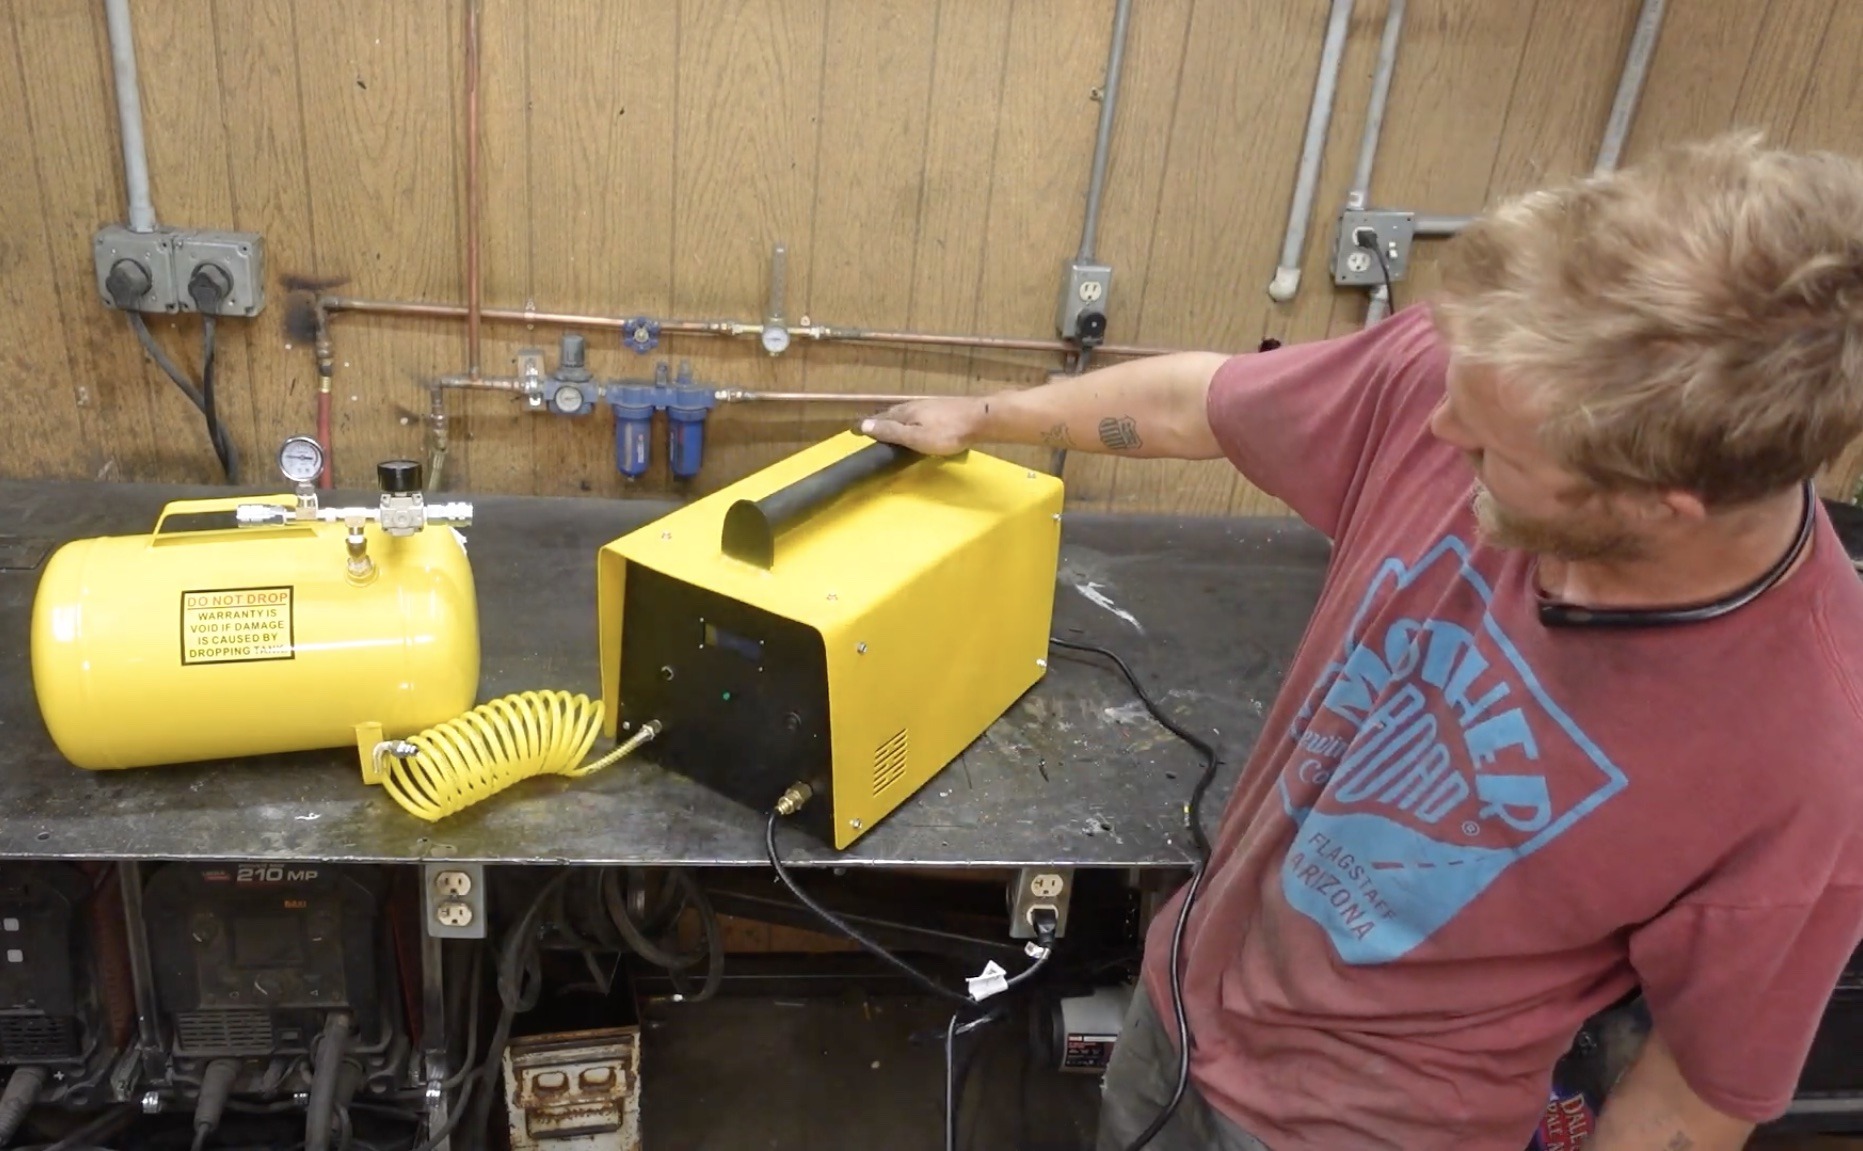 Arduino-controlled gas mixing device fills DIY laser tubes